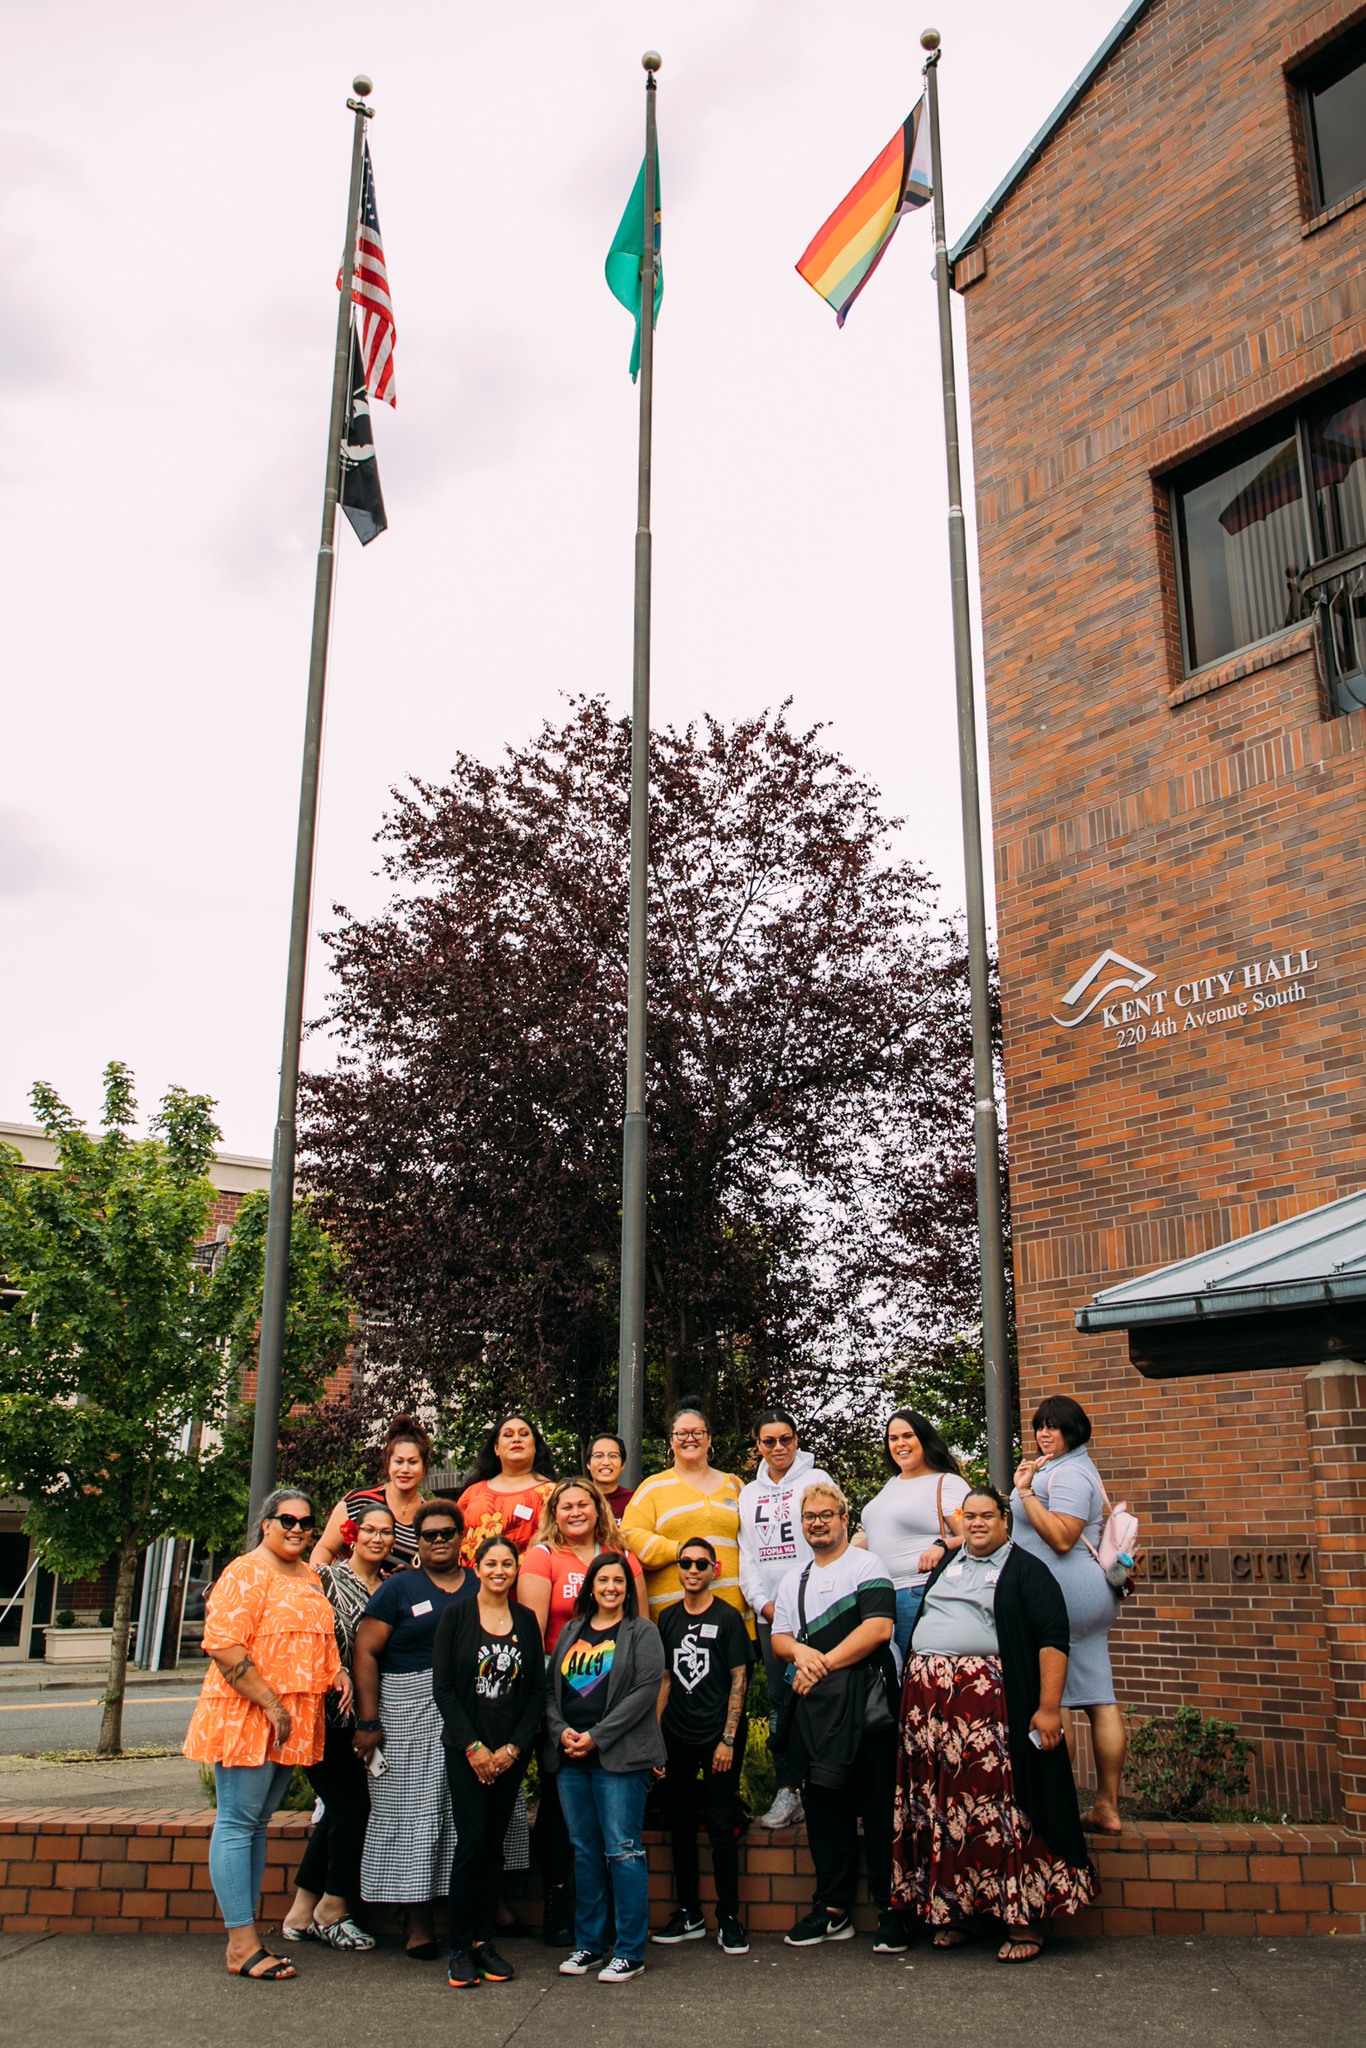 Pride Flag raised at Kent City Hall Wednesday for second year in row